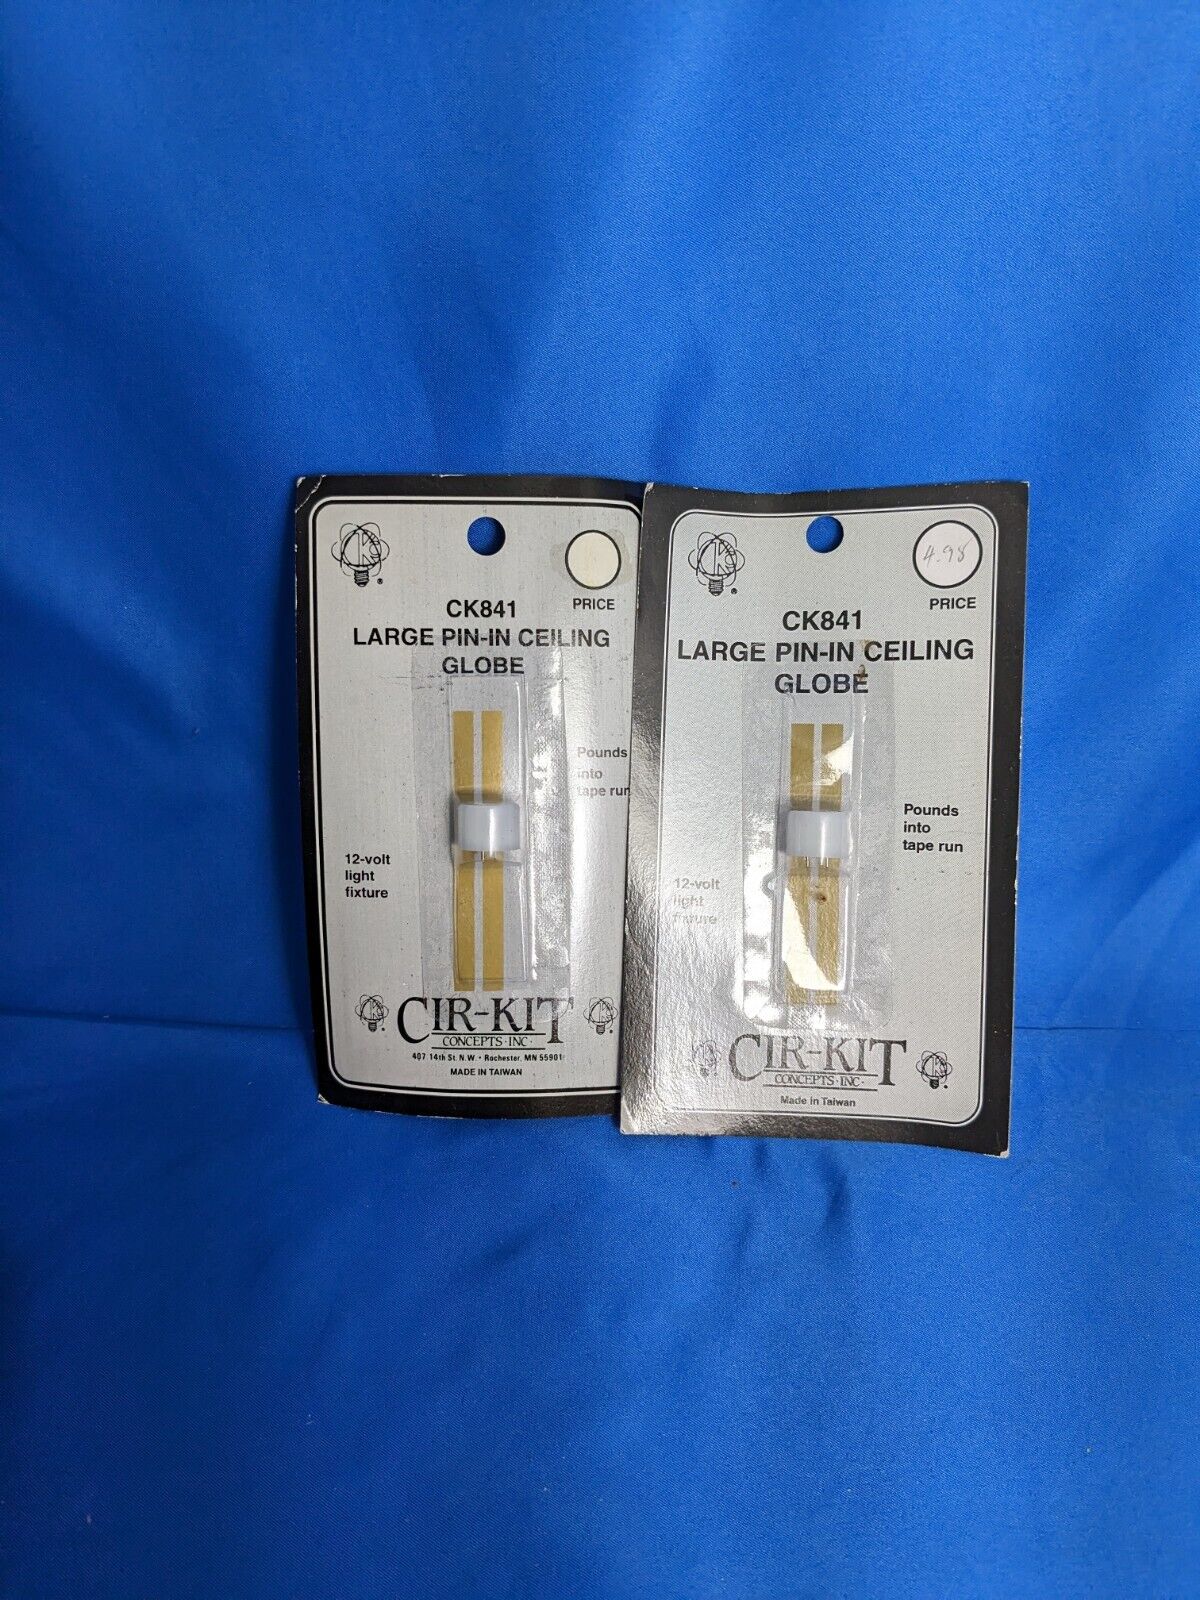 Cir-kit Ck841 Lot Of 2 Large Pin Ceiling  Dollhouse Electrical Wiring Miniatures